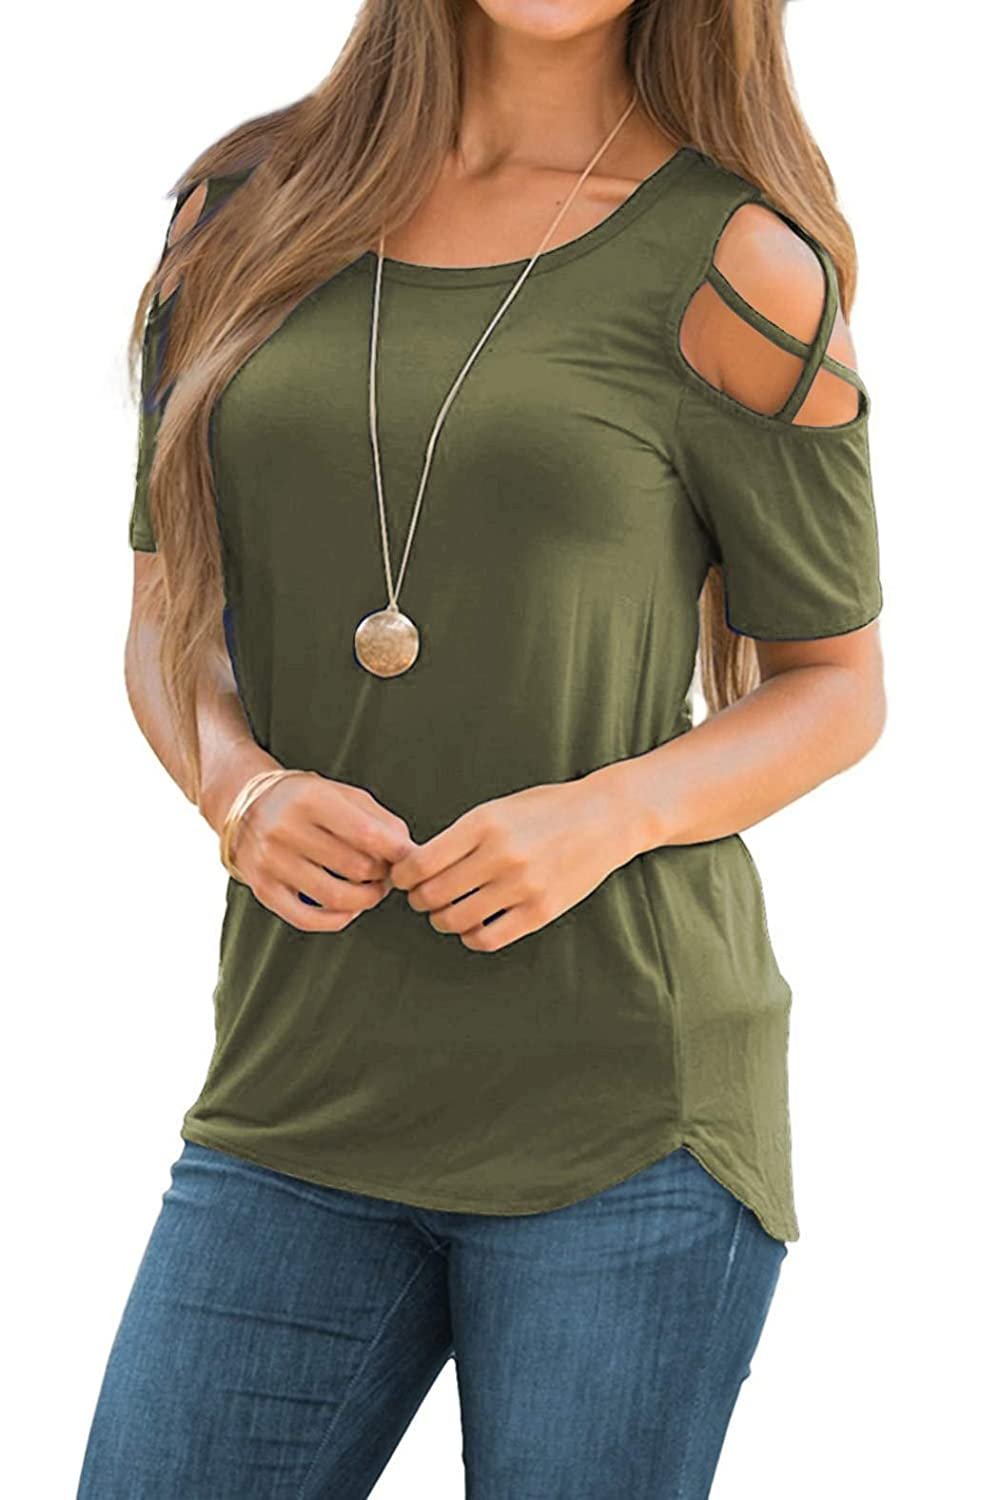 Women Short Sleeve Strappy Cold Shoulder T-Shirt Tops Blouses